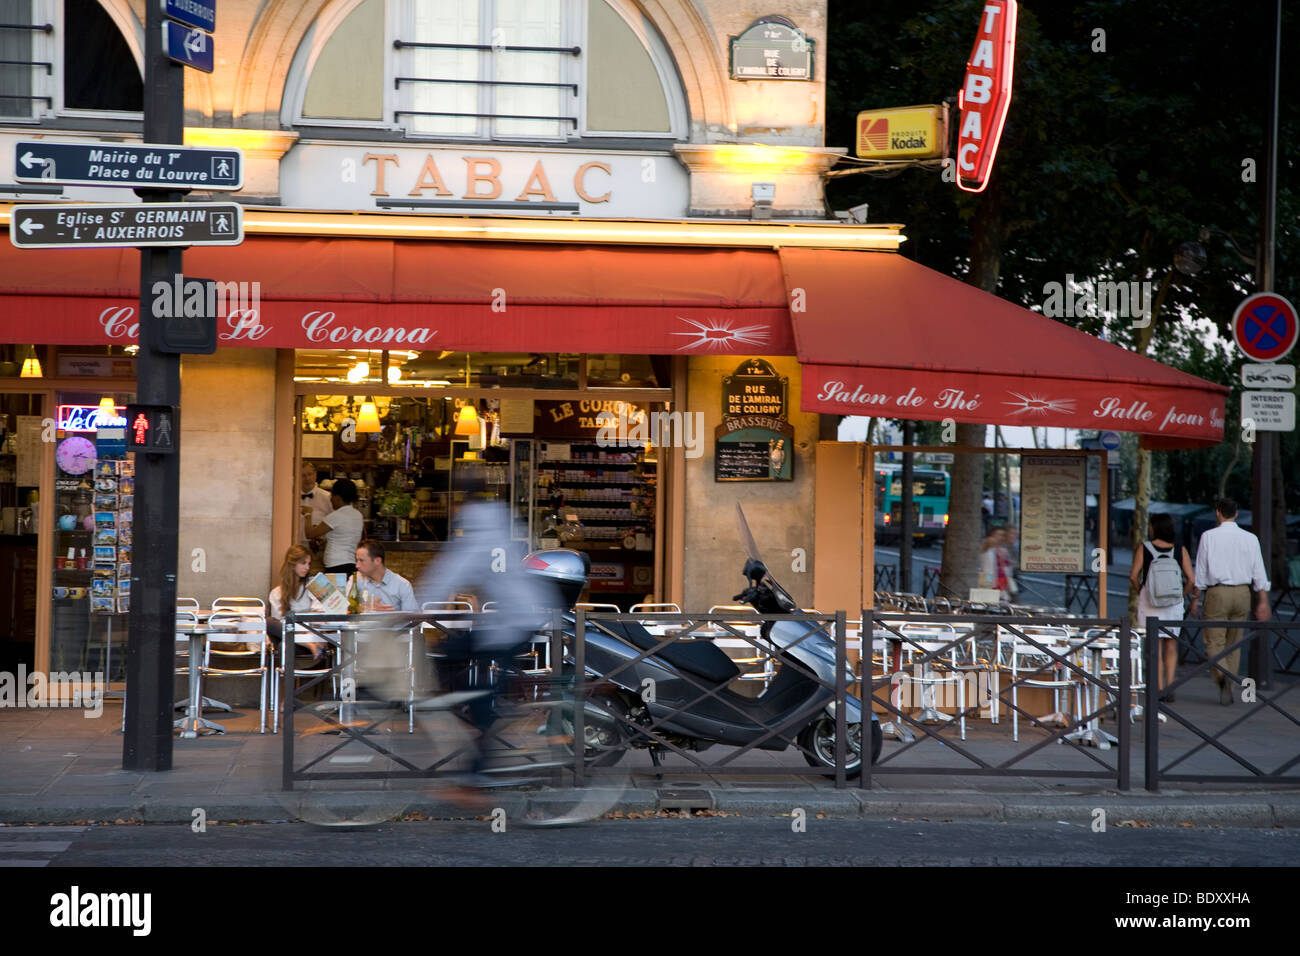 Tabac and Cafe near Louvre Art Museum, Paris, France Stock Photo